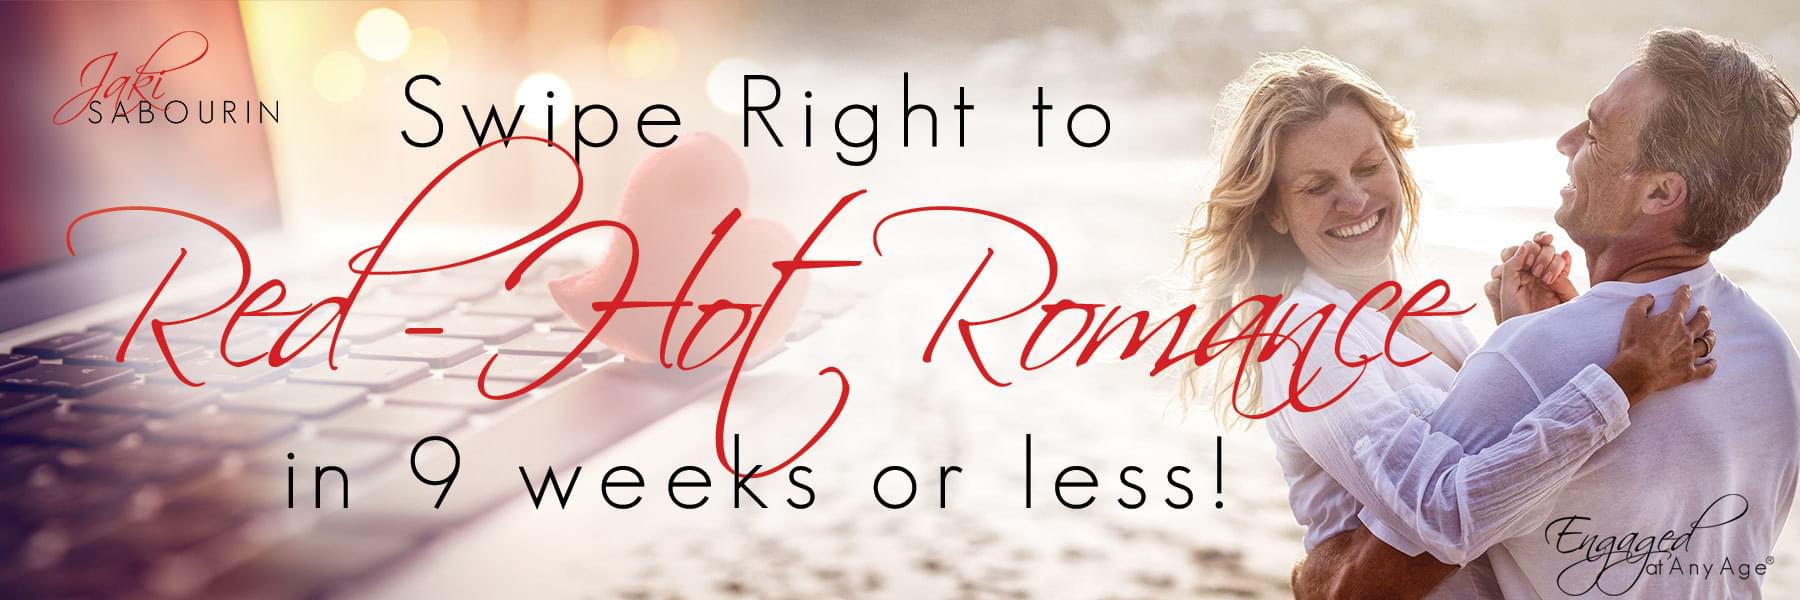 Swipe Right to Red Hot Romance in 9 Weeks or Less!